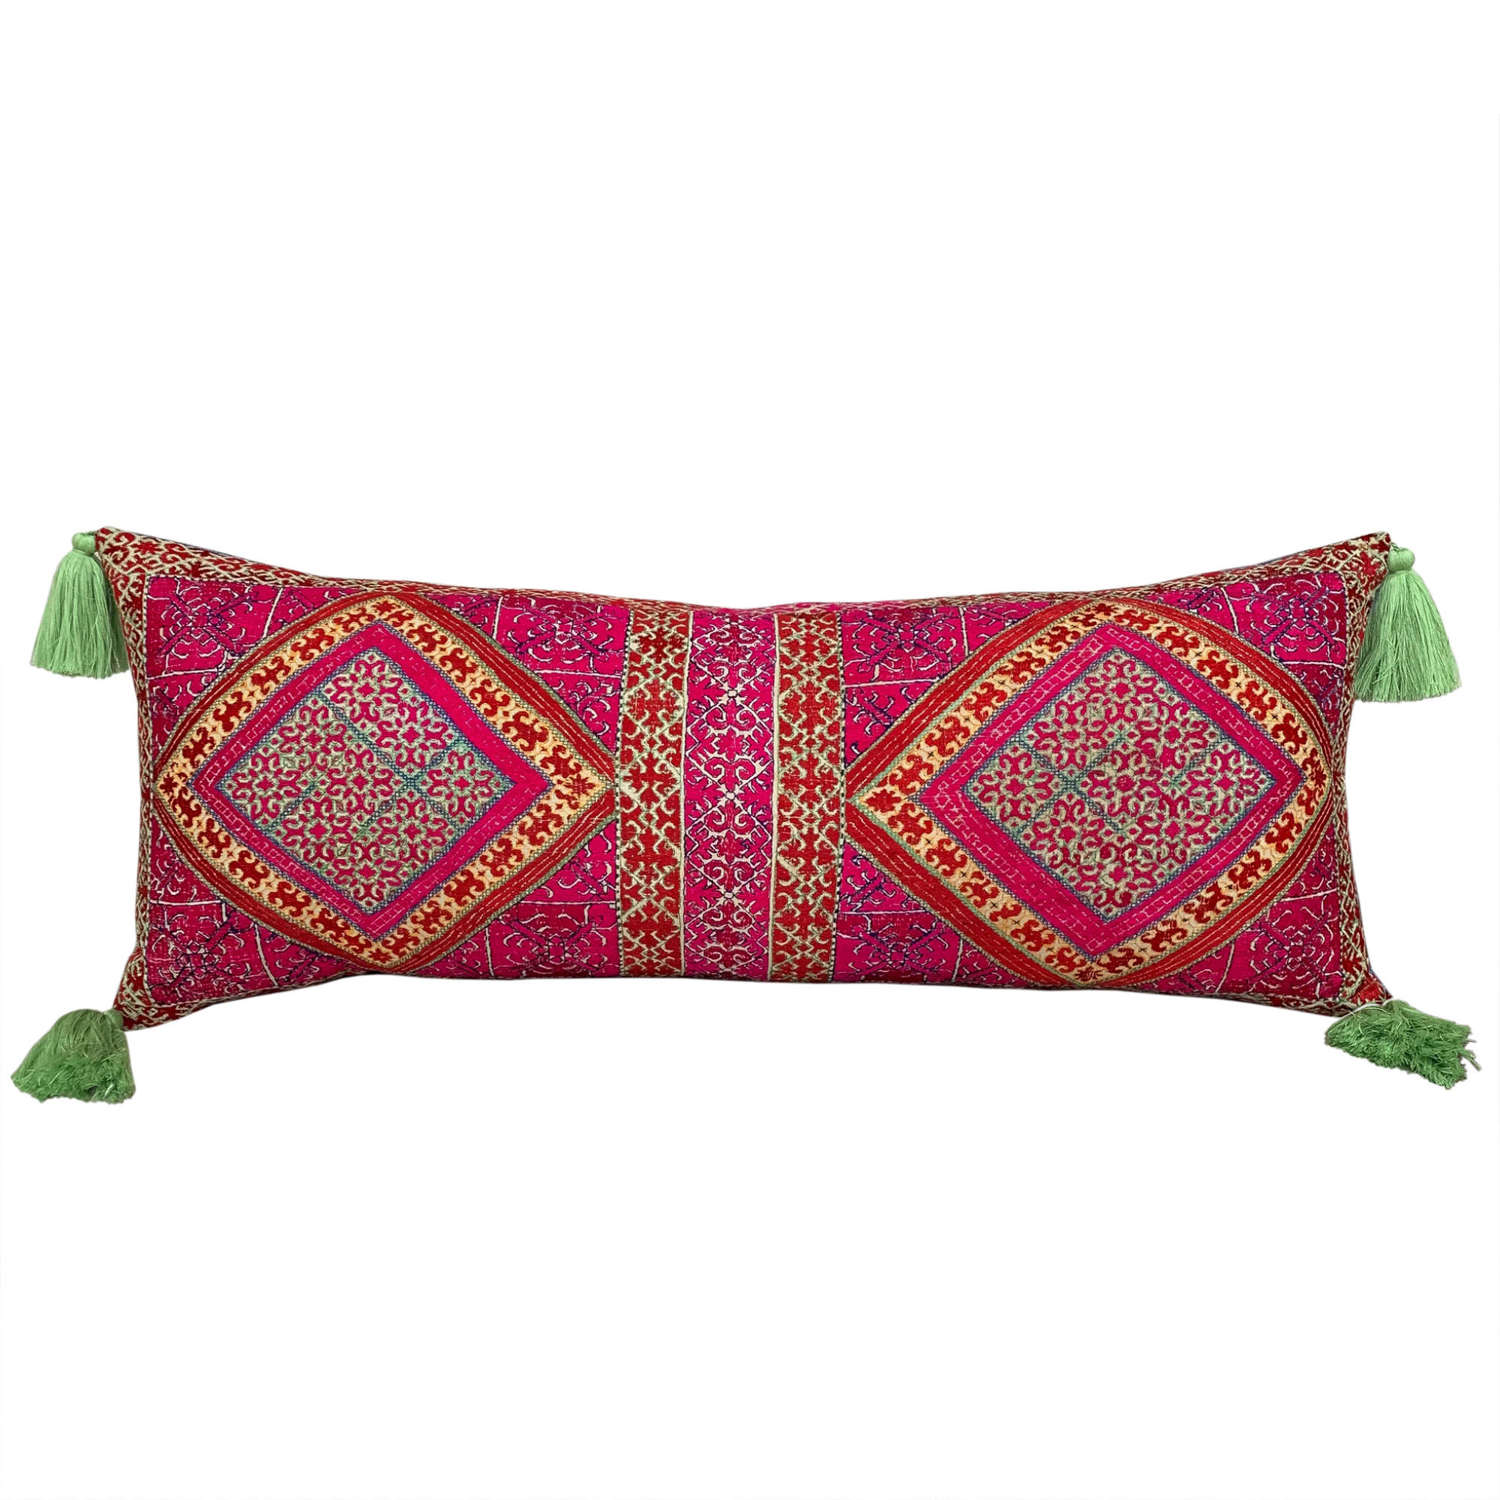 Swat pillow with green tassels